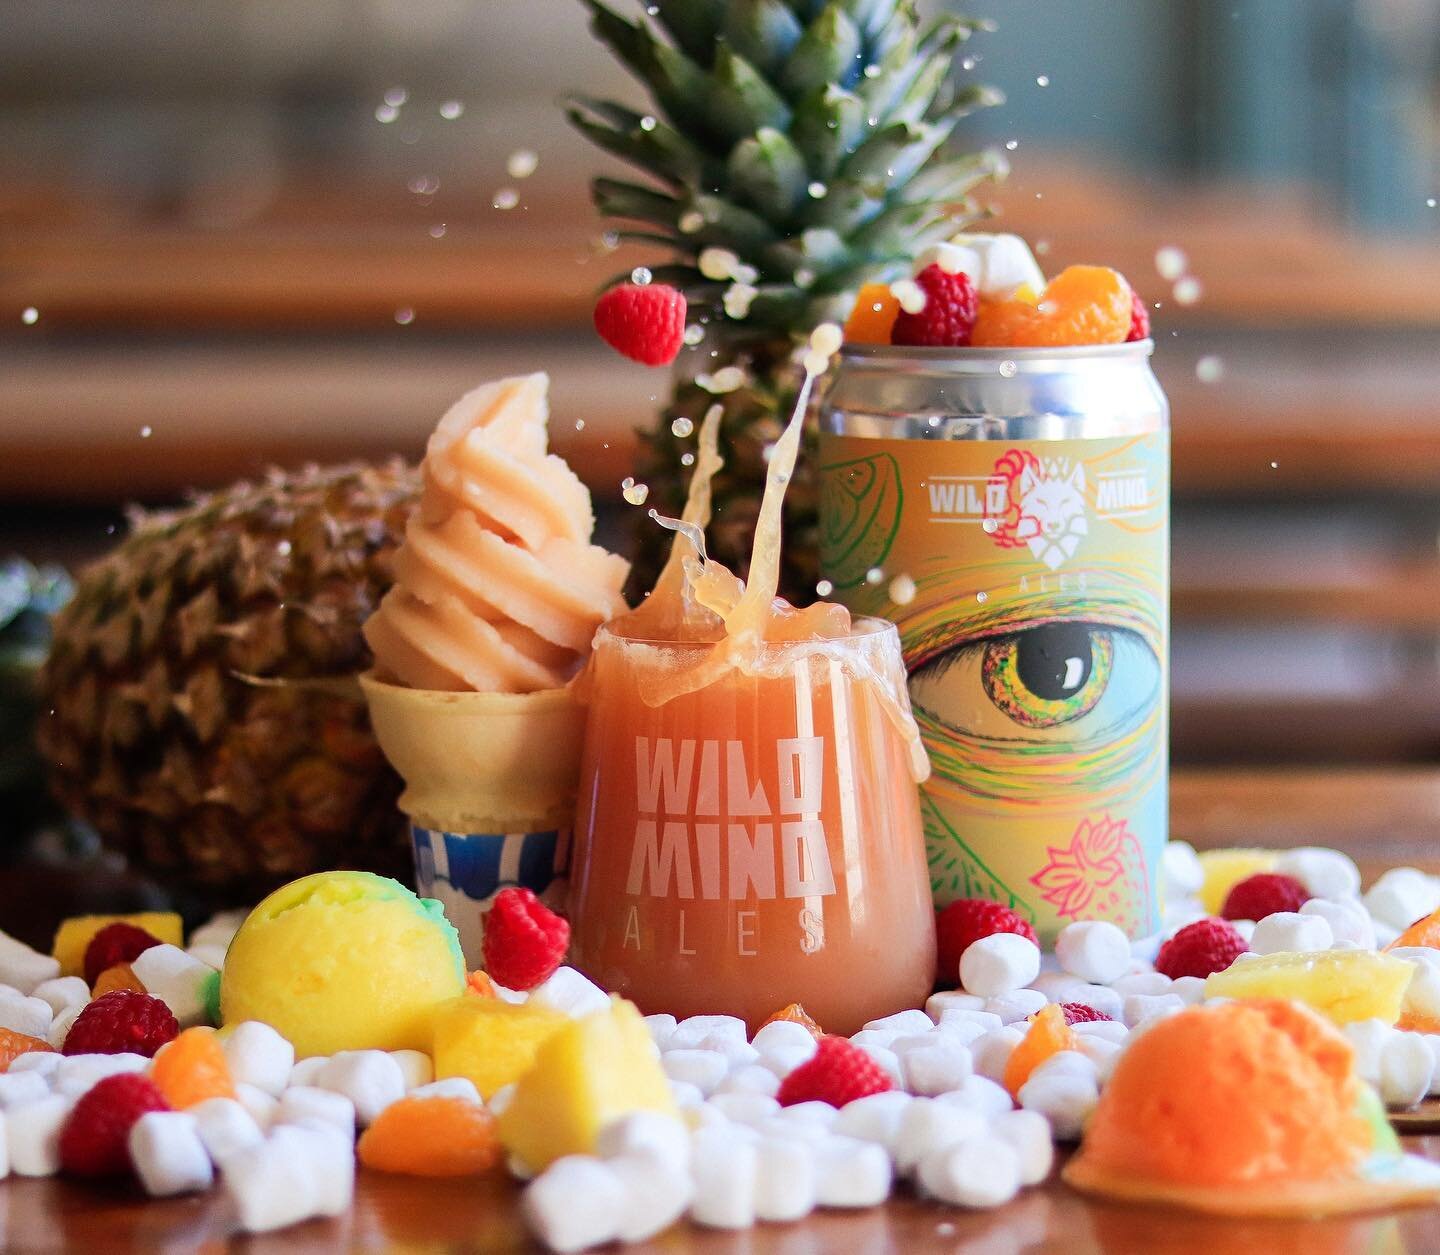 792 pounds of fruit were used in the making of Vision Board. 792!!!! That&rsquo;s 40 pounds per keg. The most fruit we&rsquo;ve EVER put in a beer 🤯🤯 on tap &amp; in ice cream cones now at the brewery 🍻

Vision Board clocks in at 6.2% ABV and is a